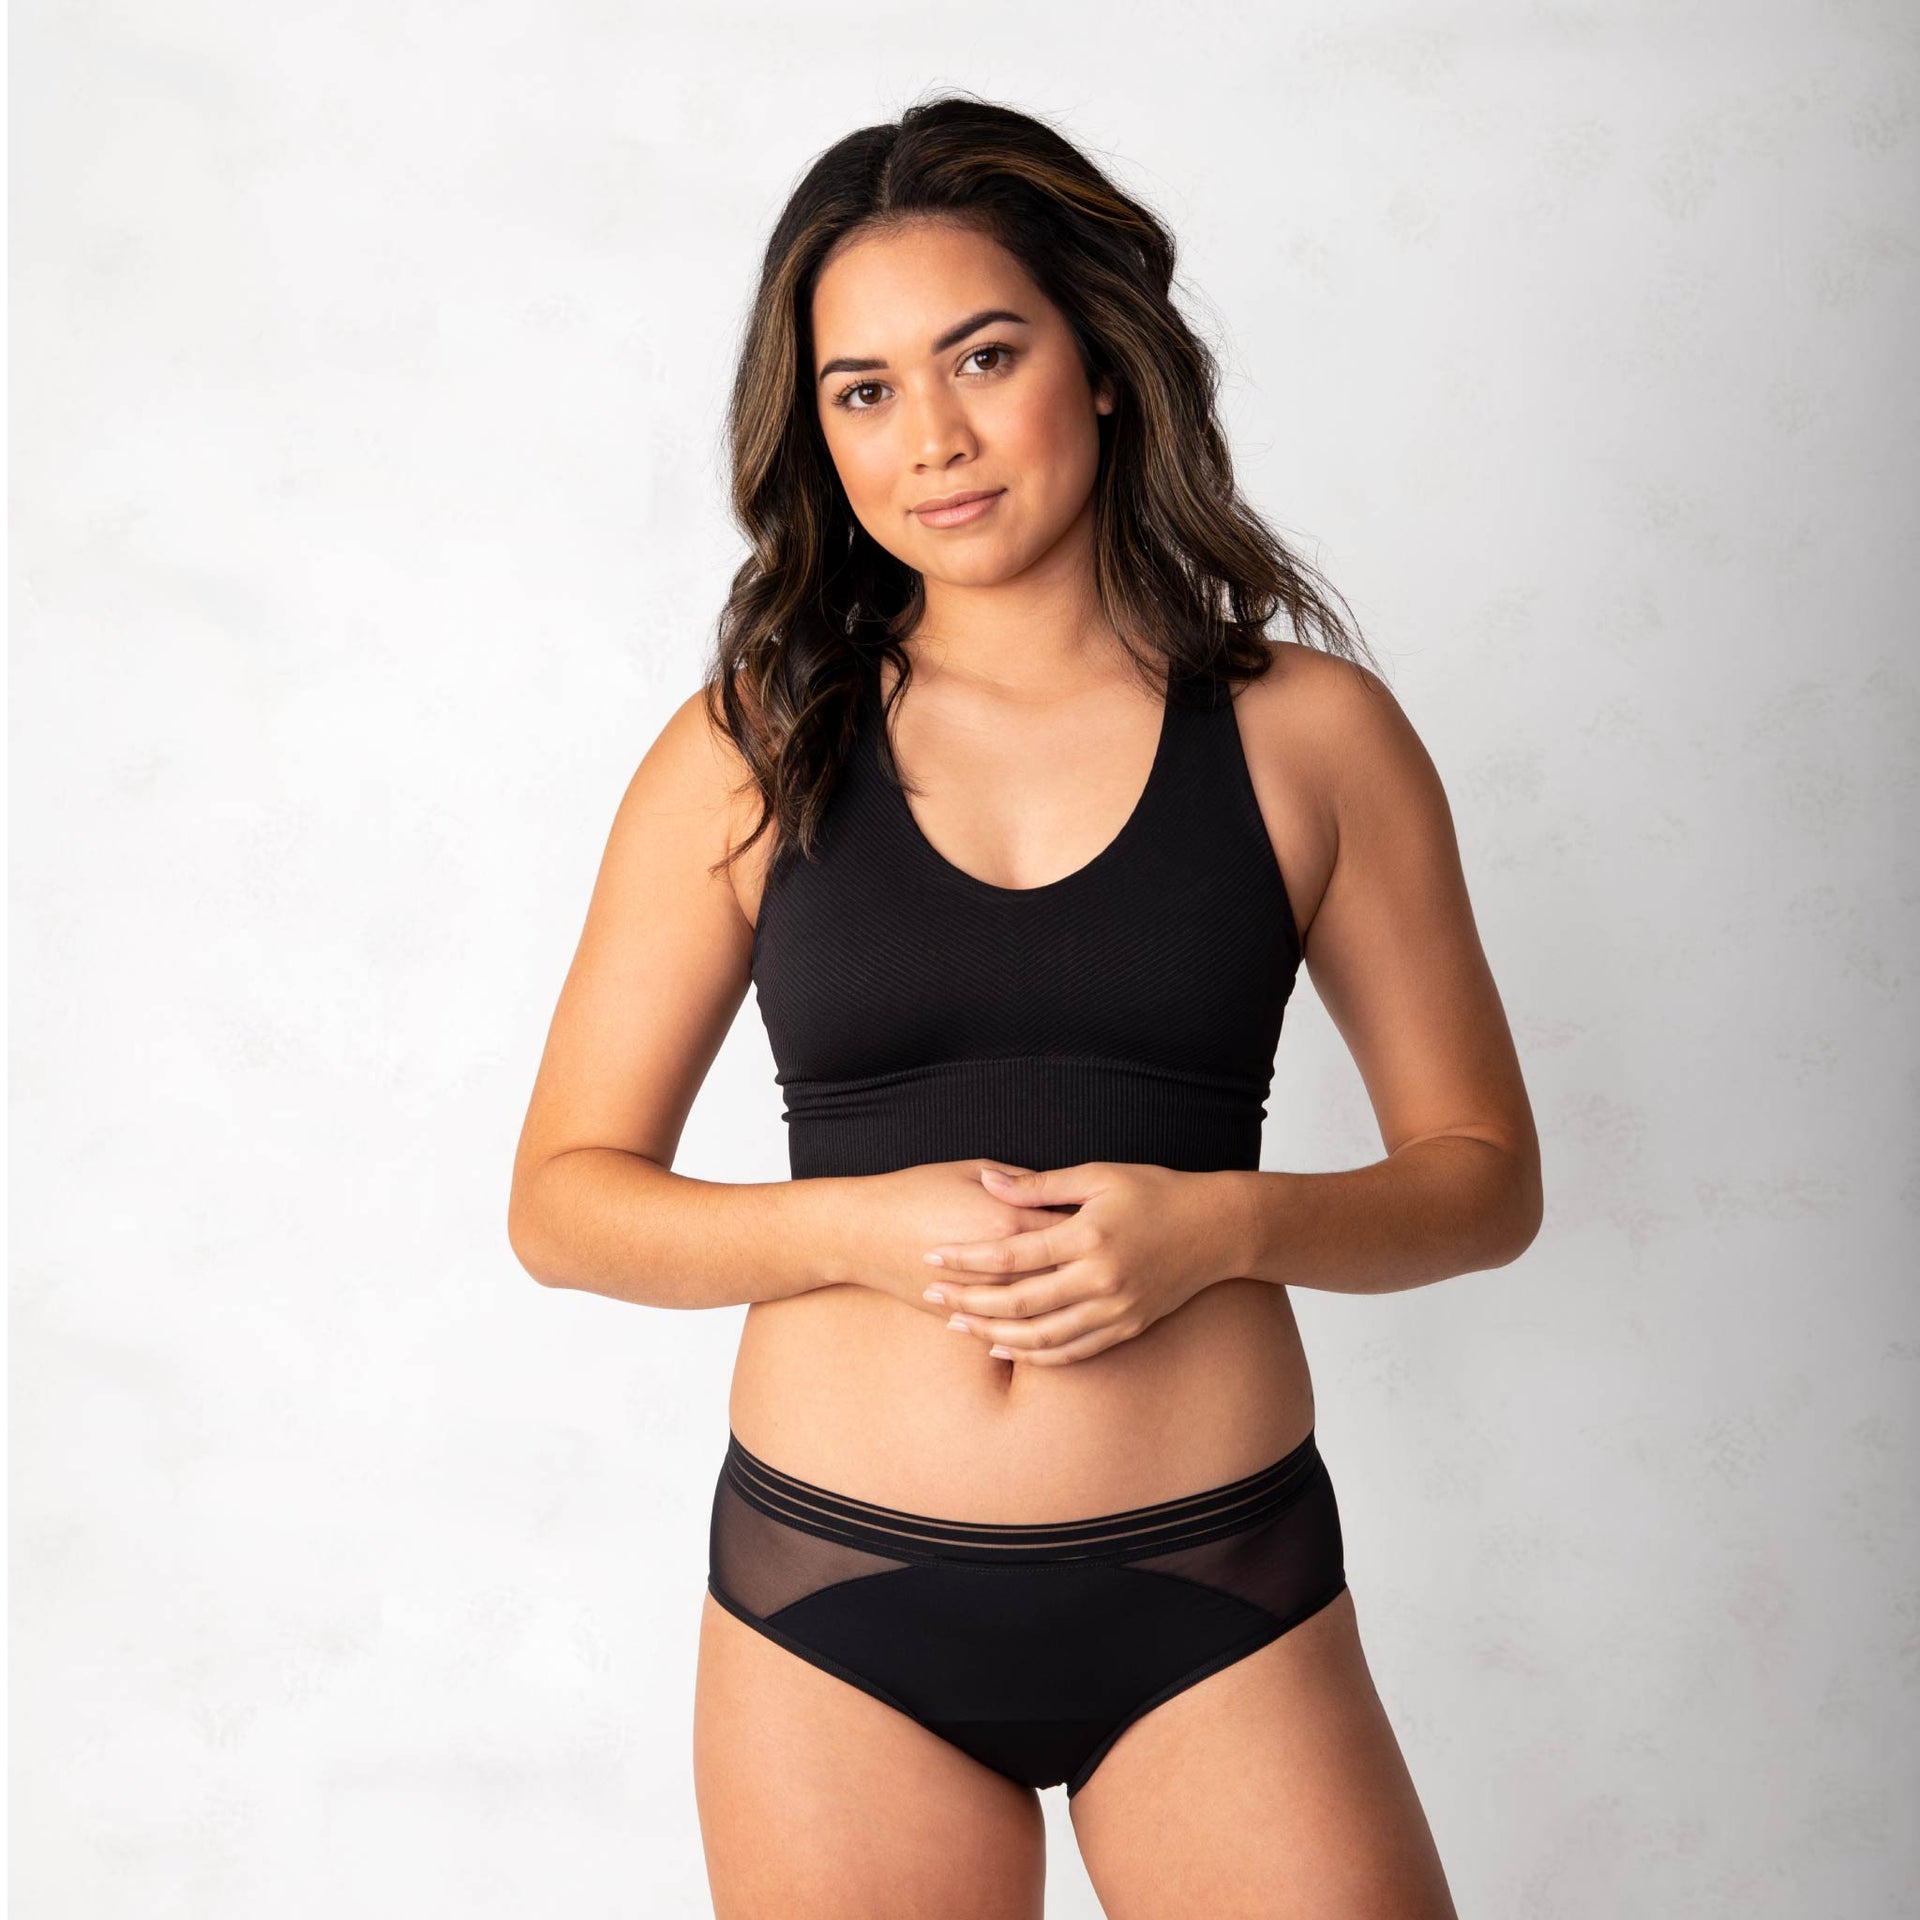 Proof. on LinkedIn: Our Mesh Hipster was named the Most Comfortable Period  Underwear by Good…